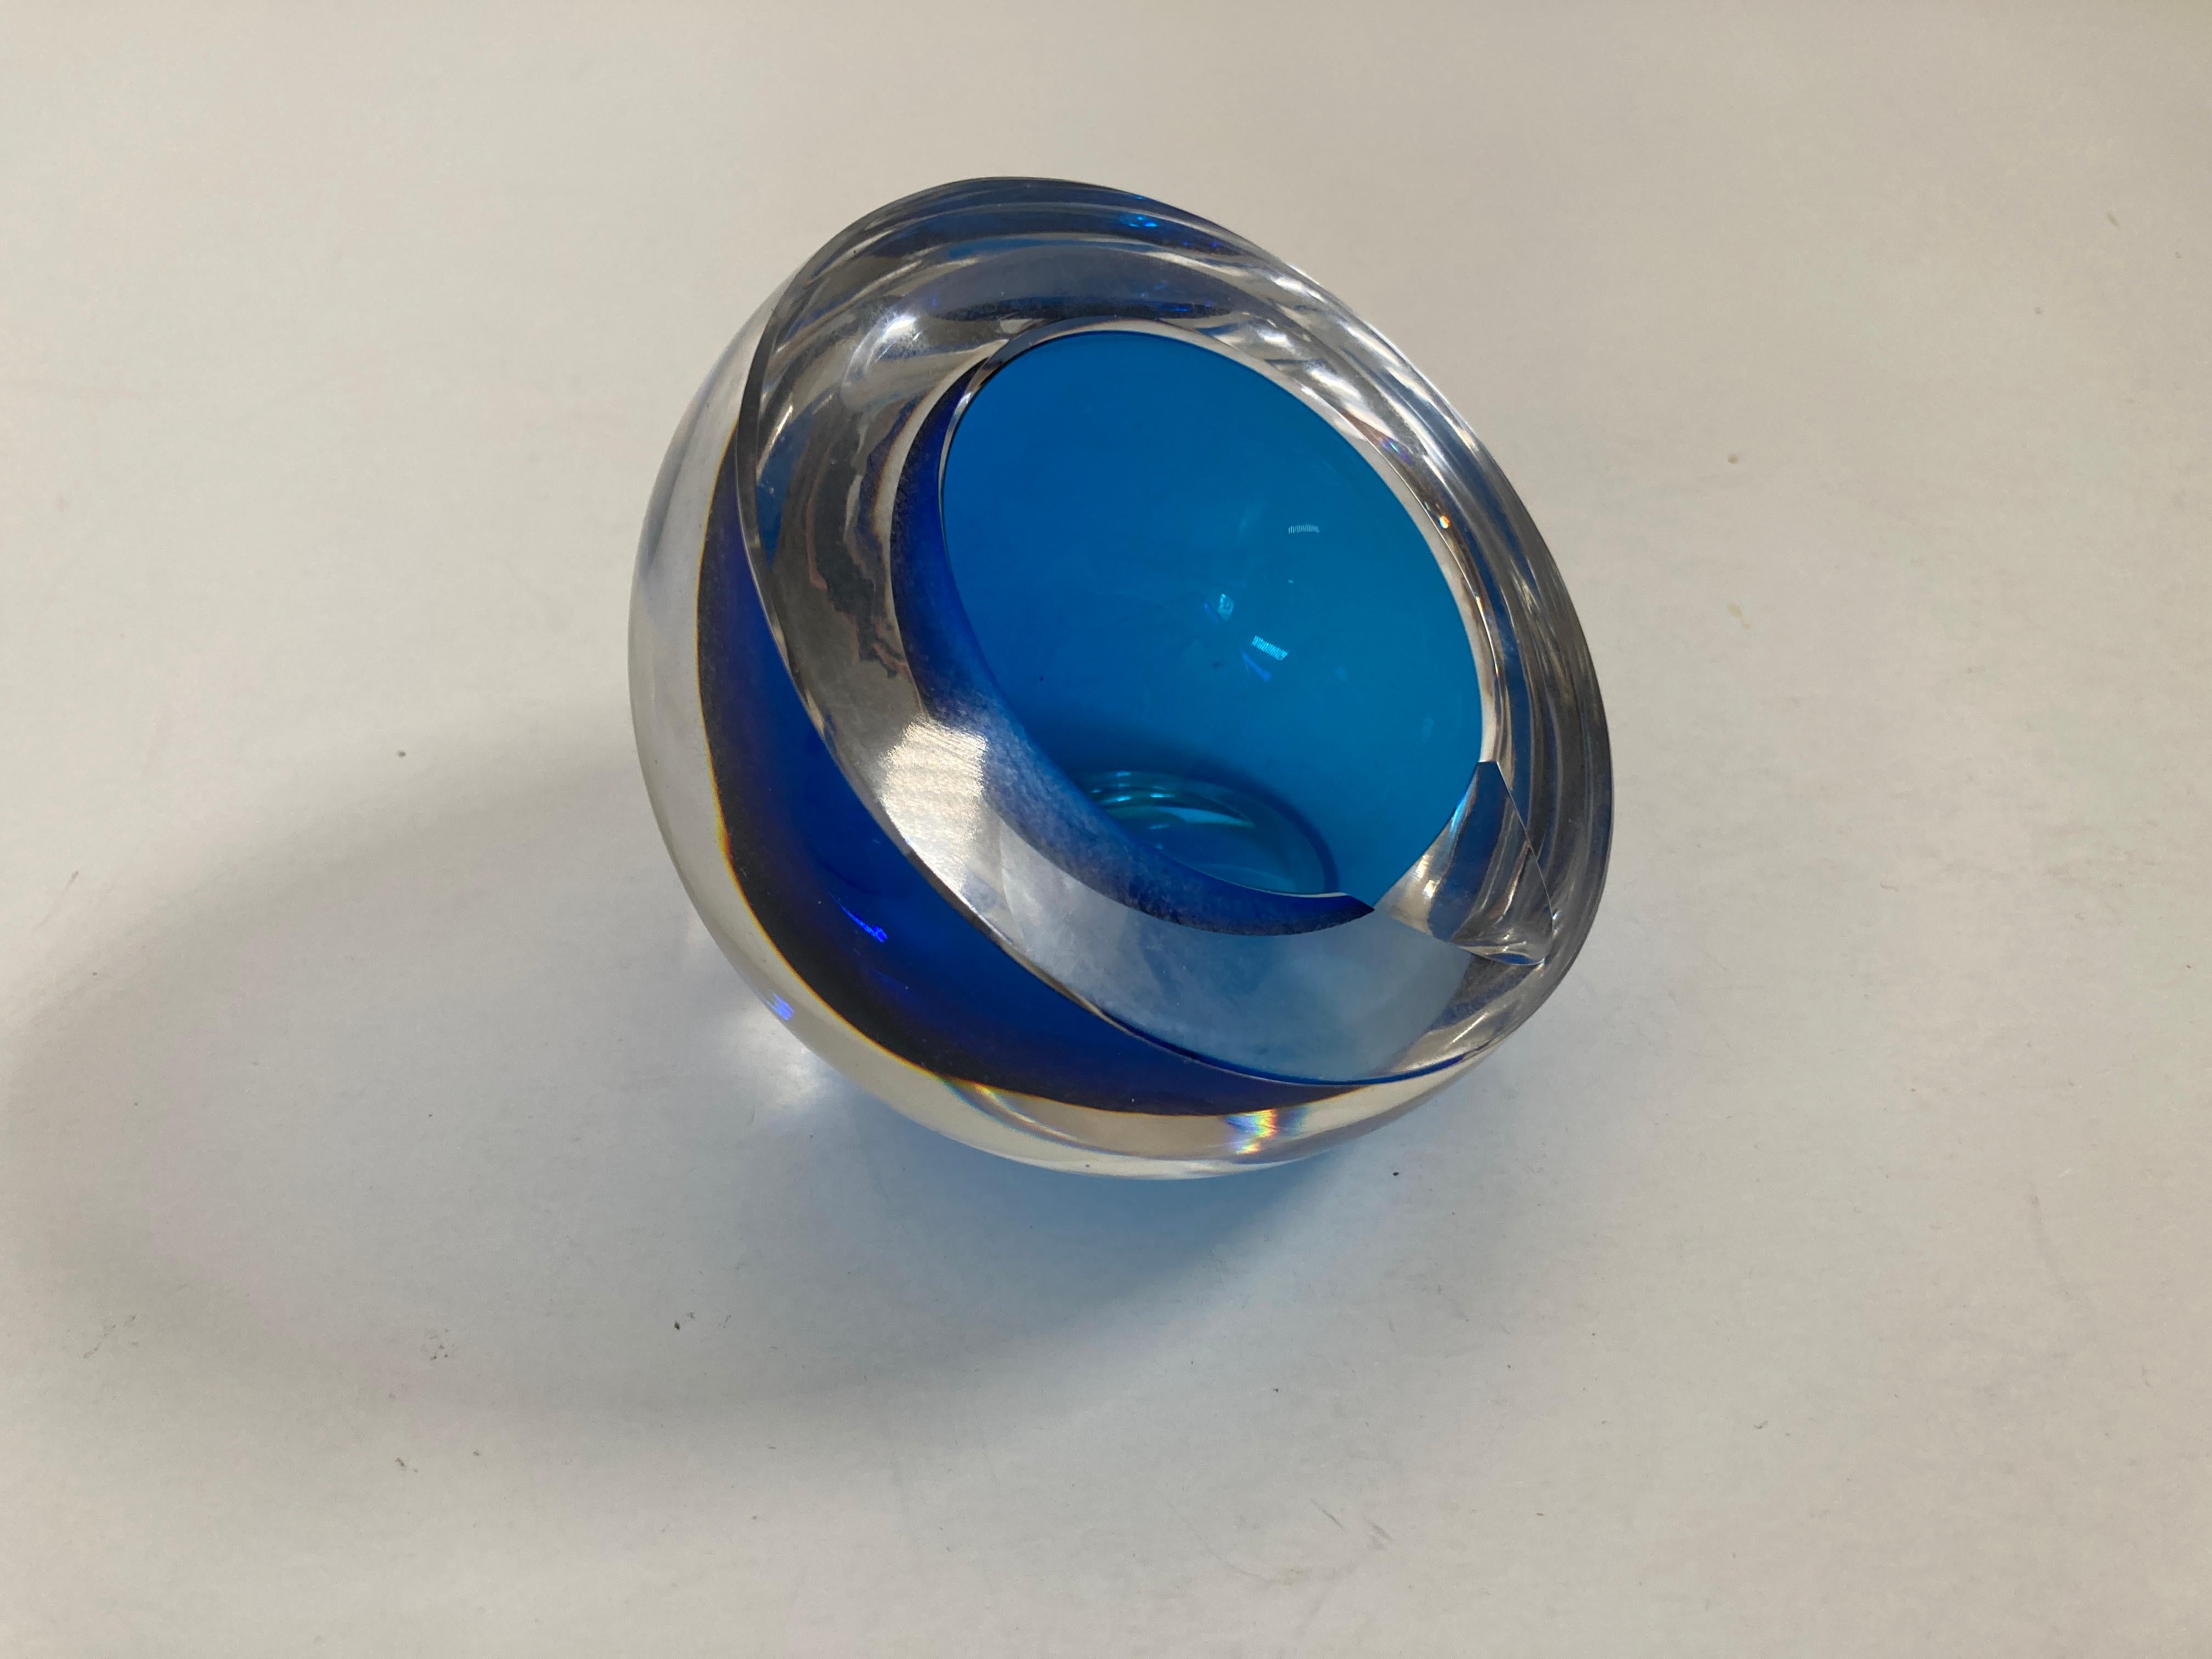 Gorgeous vintage Murano Venetian handblown art glass bowl or ashtray. 
Italian Murano Sommerso orb blue and clear art glass ashtray
Extremely hard to find a heavyweight glass ashtray in a gorgeous minimal design.
A very beautiful and substantial